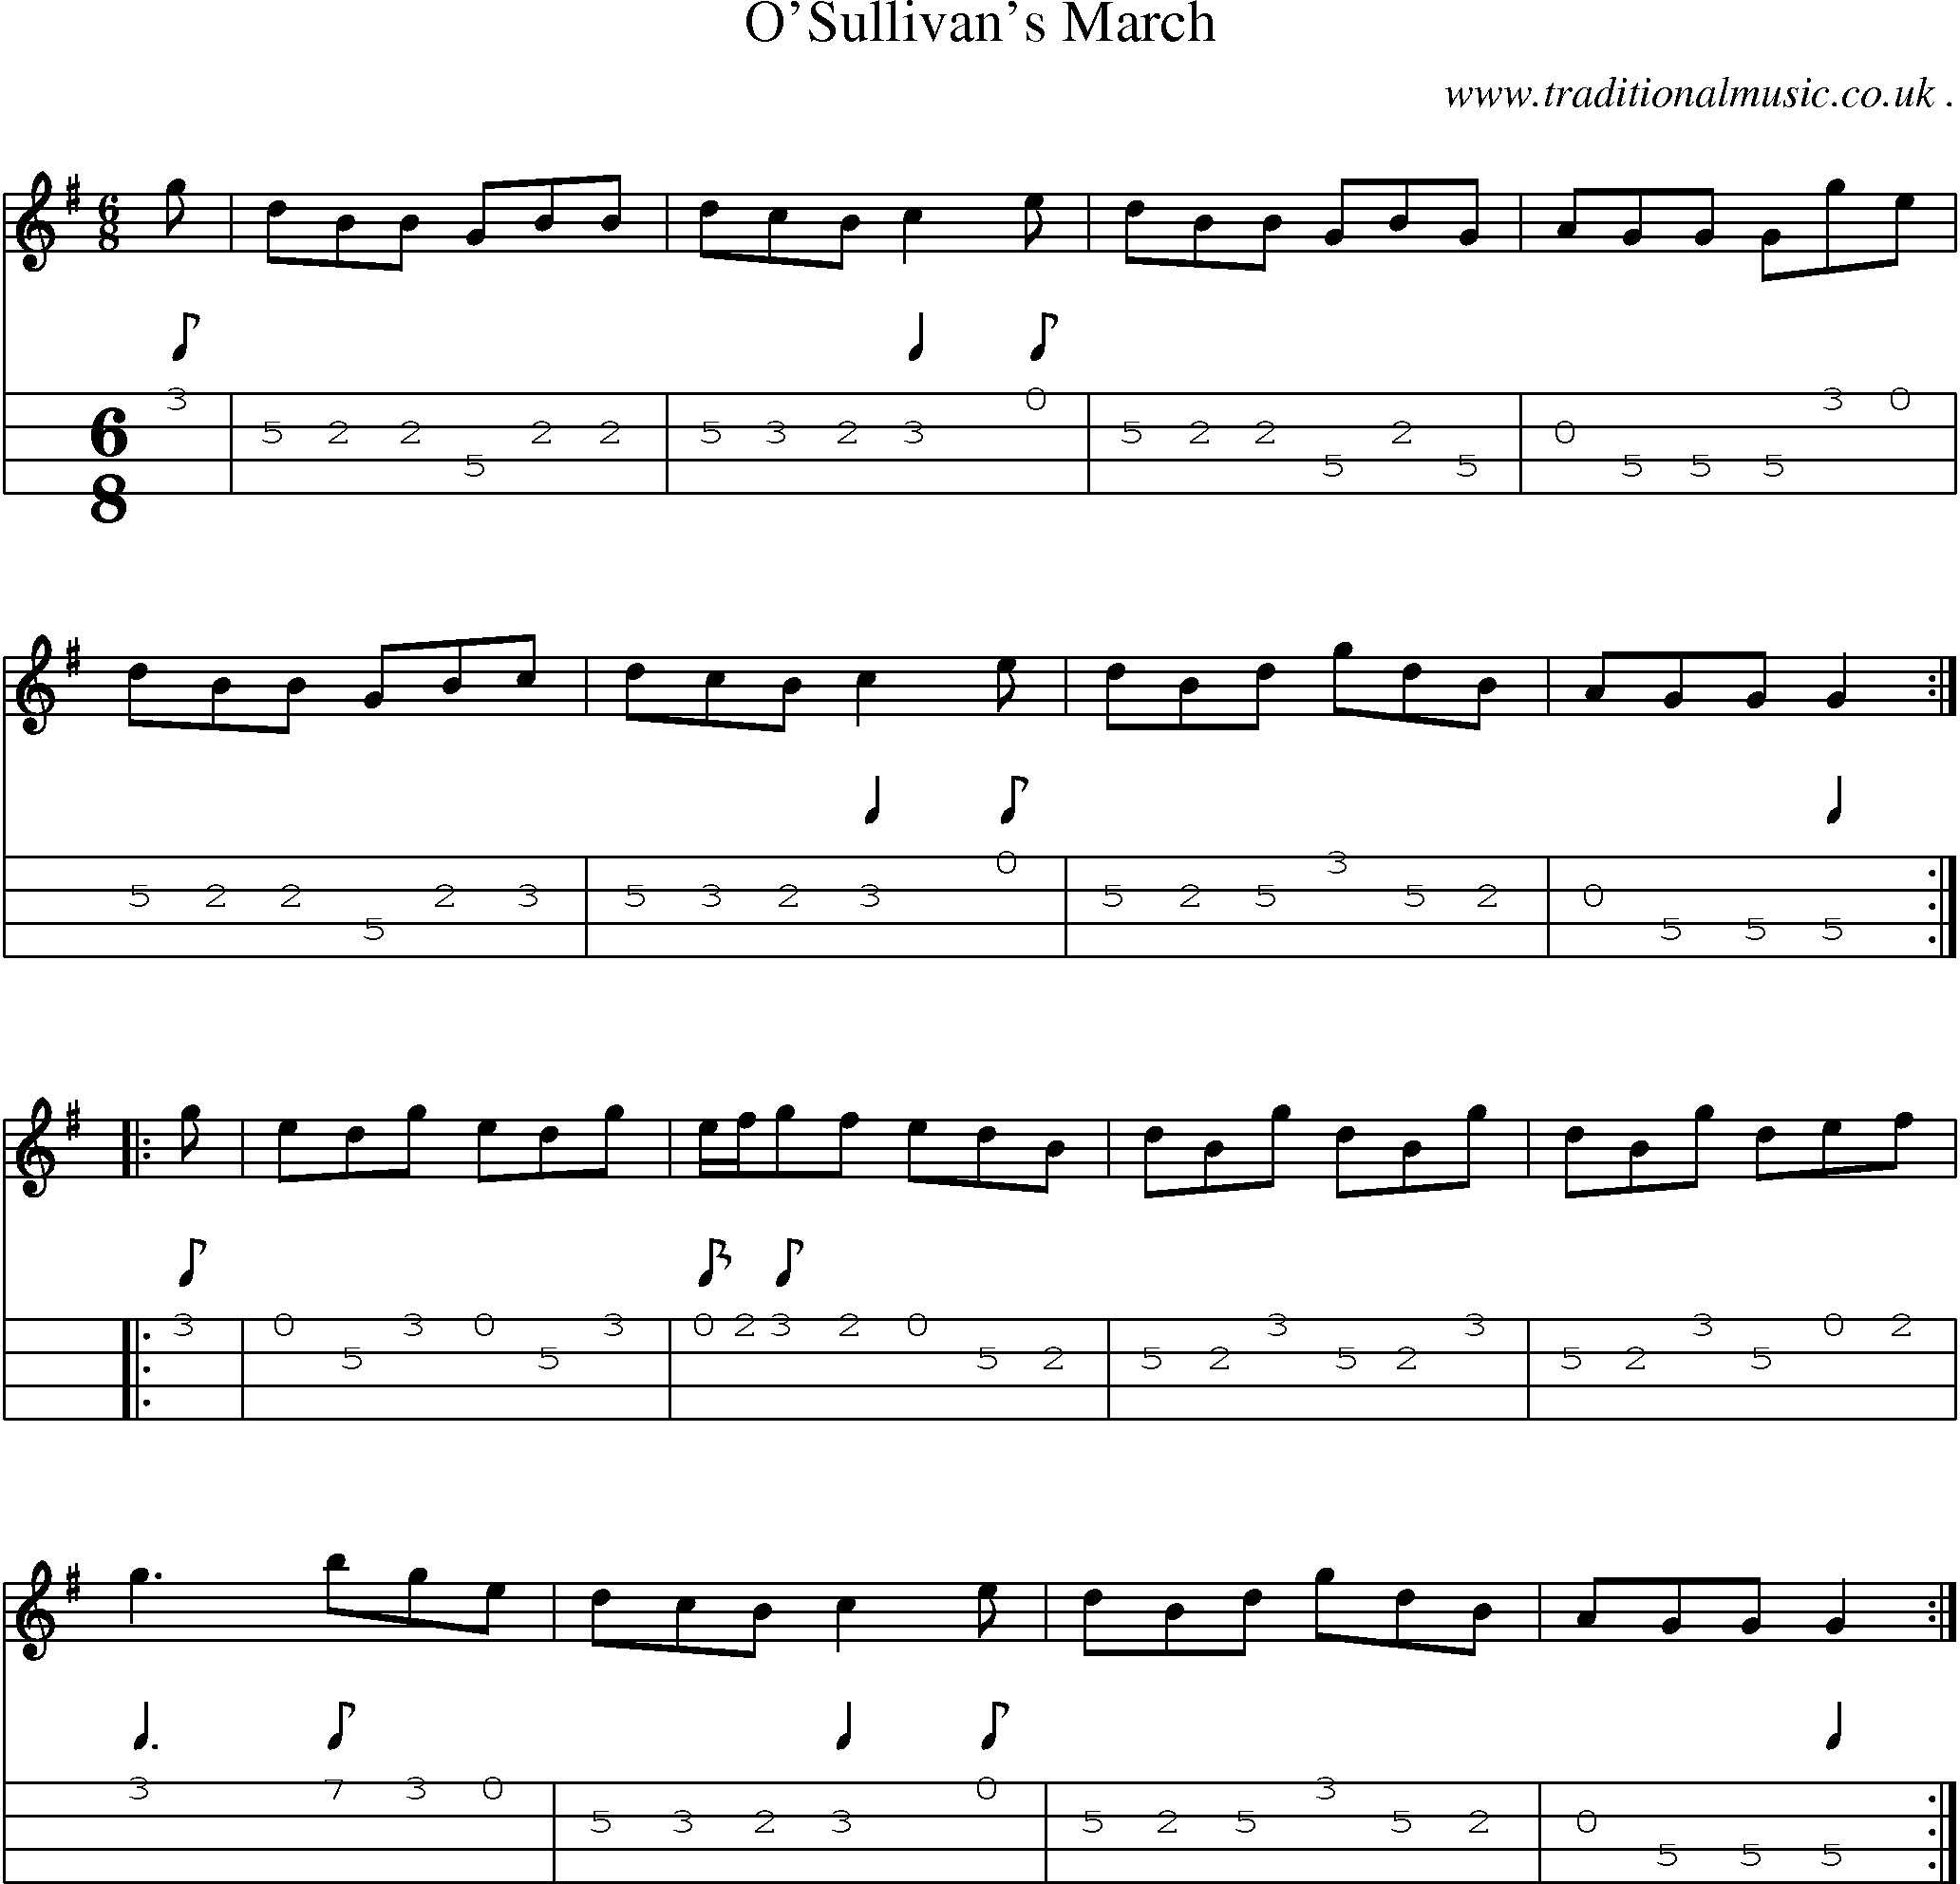 Sheet-music  score, Chords and Mandolin Tabs for Osullivans March